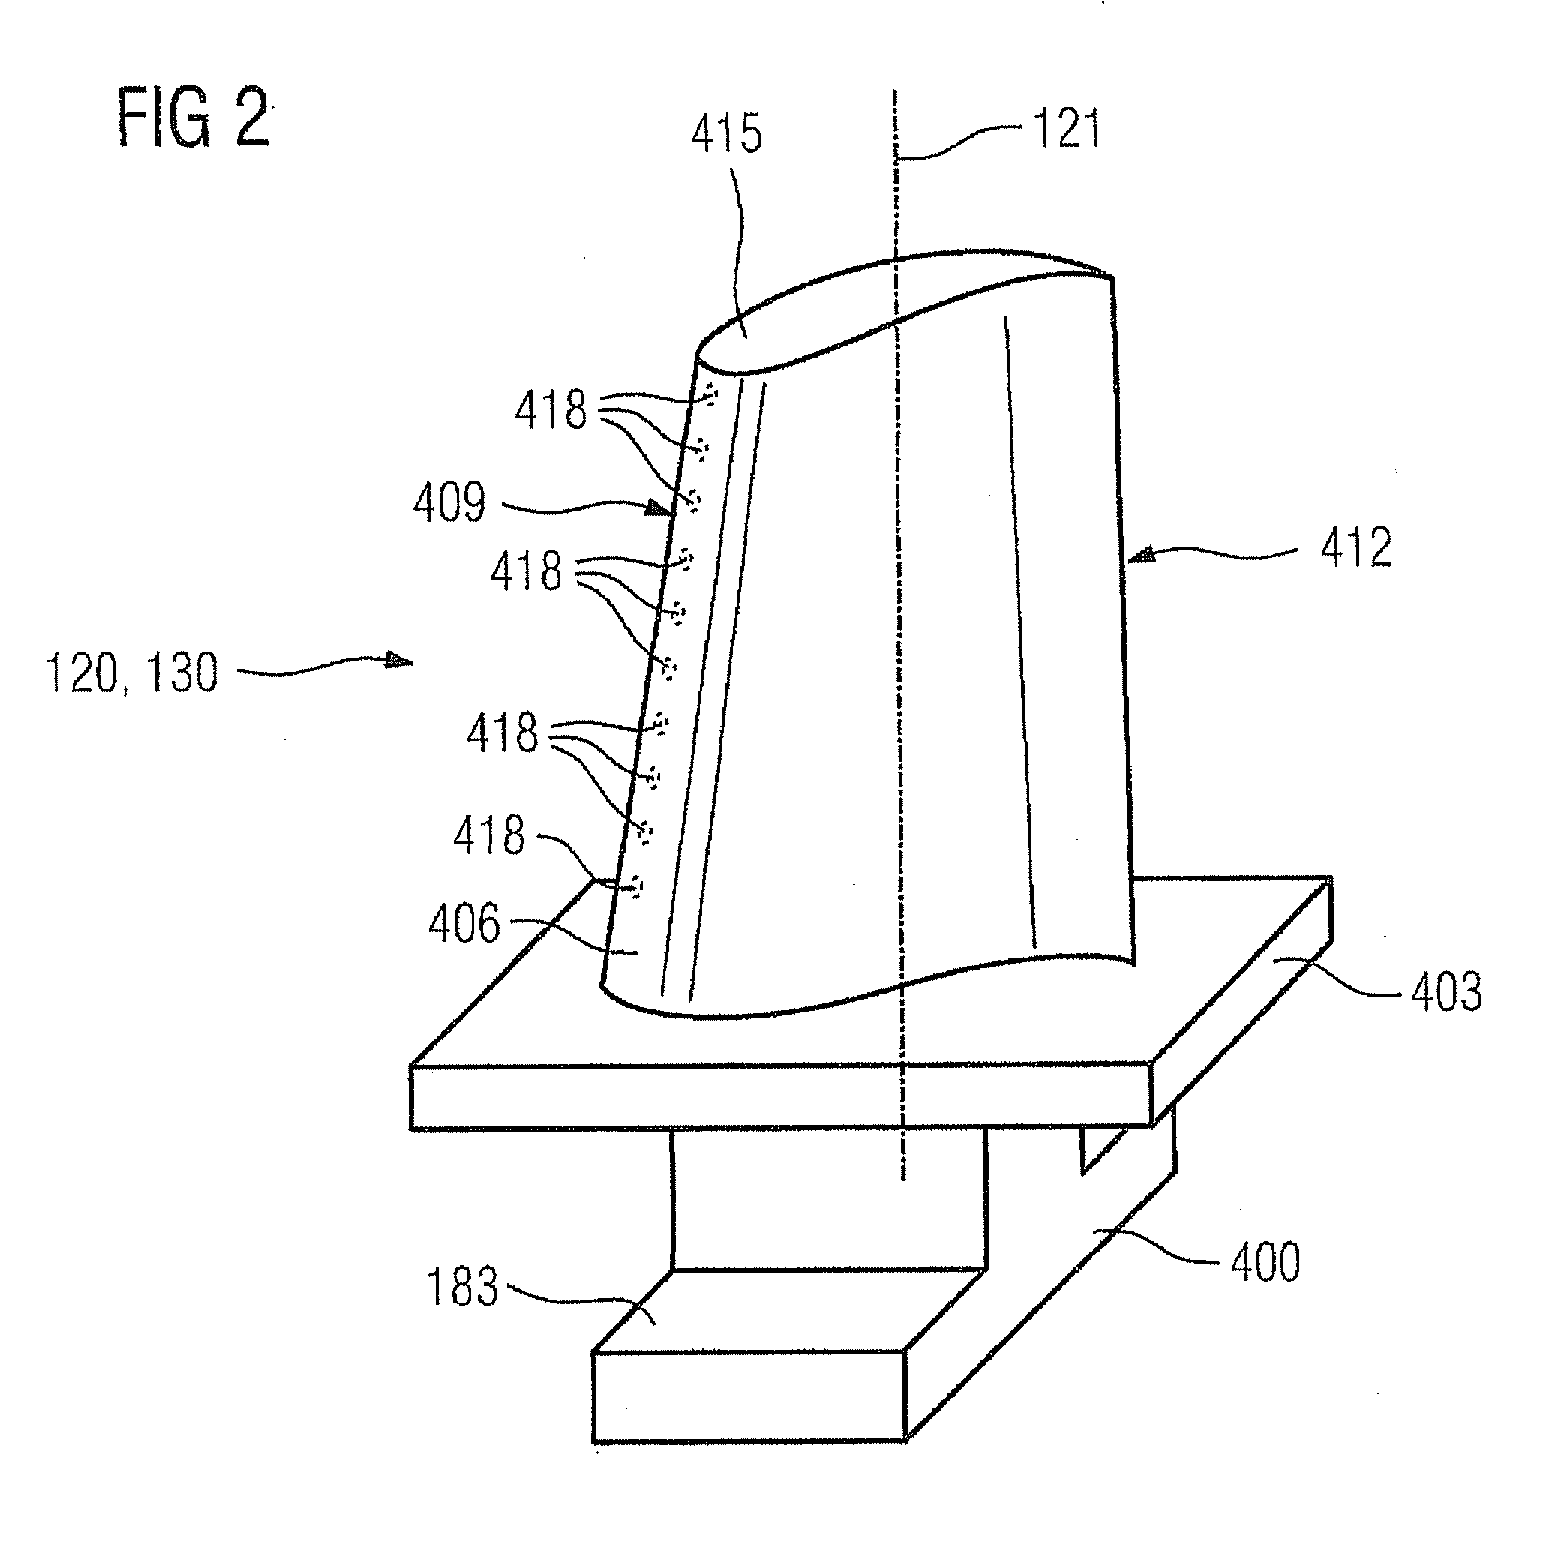 Process for removing a coating from surfaces of components using only hydrochloric acid